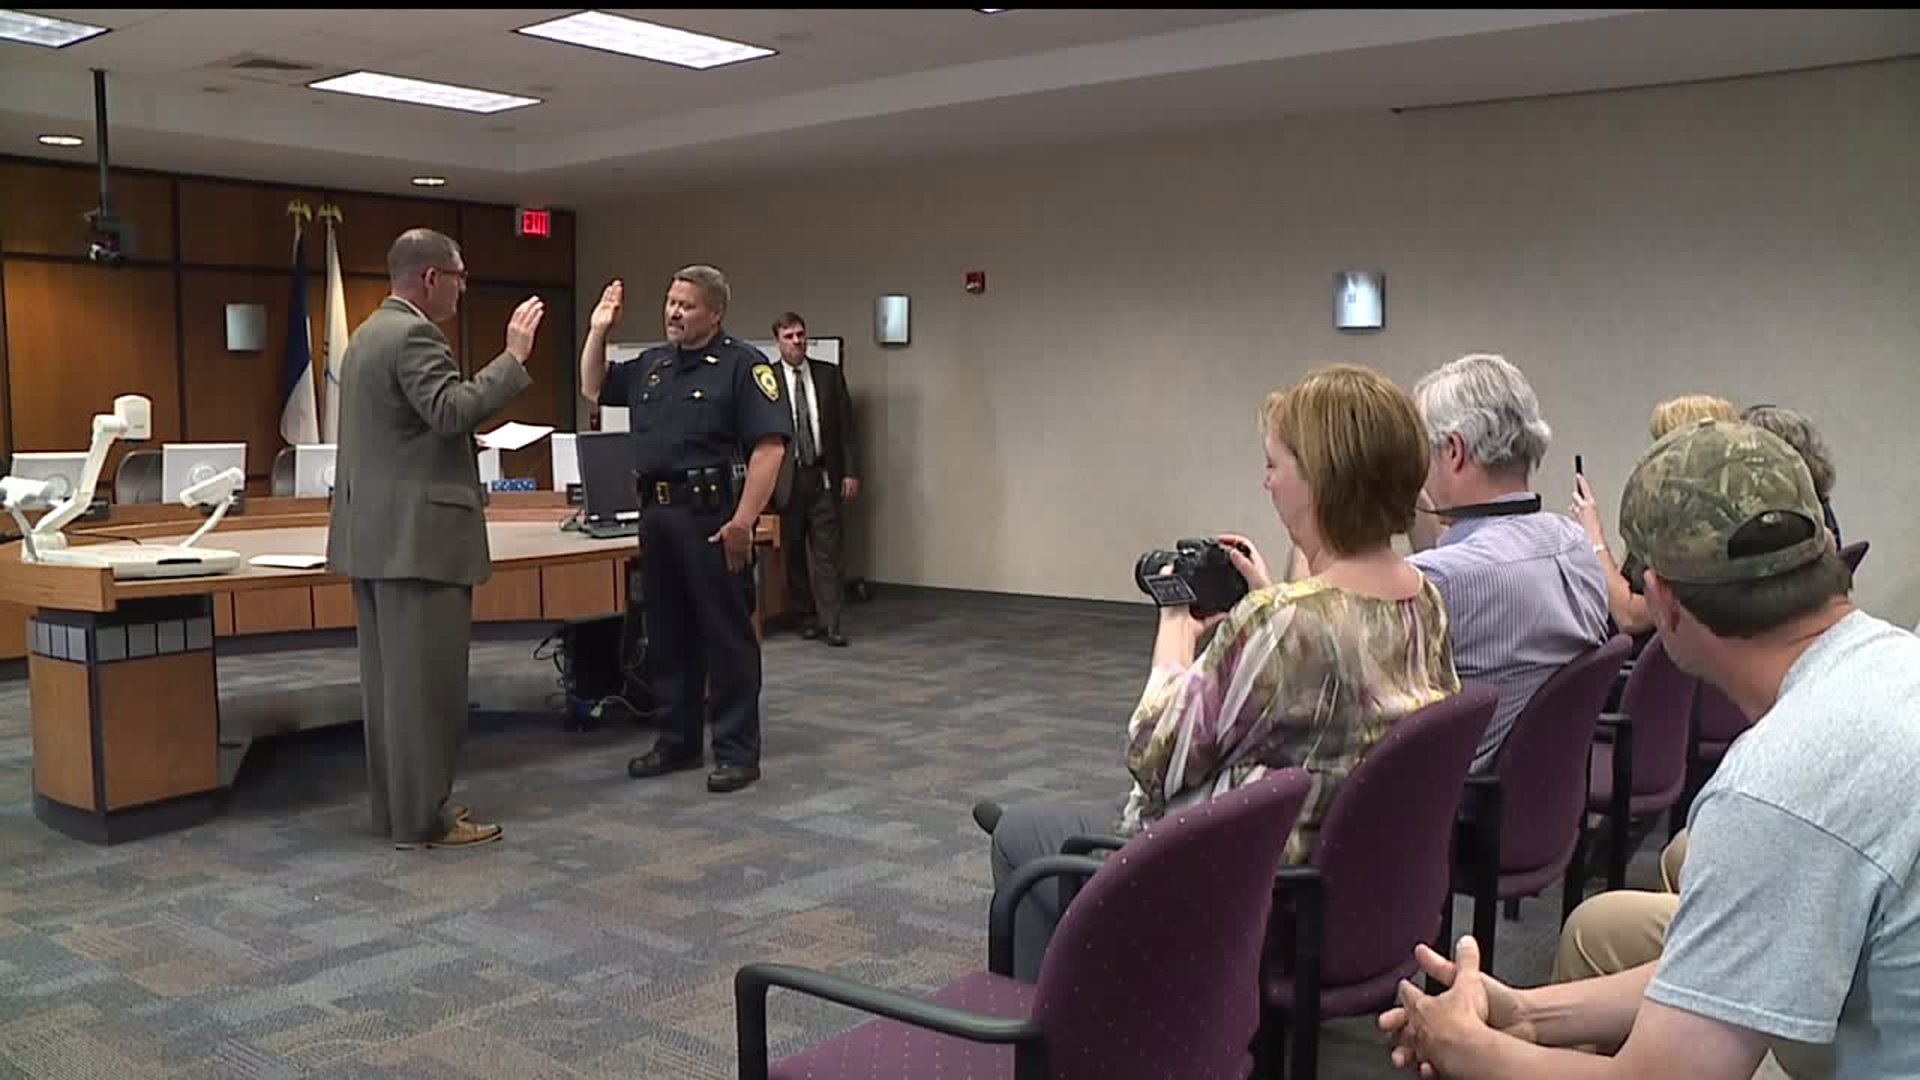 Kimball sworn in as new Police Chief